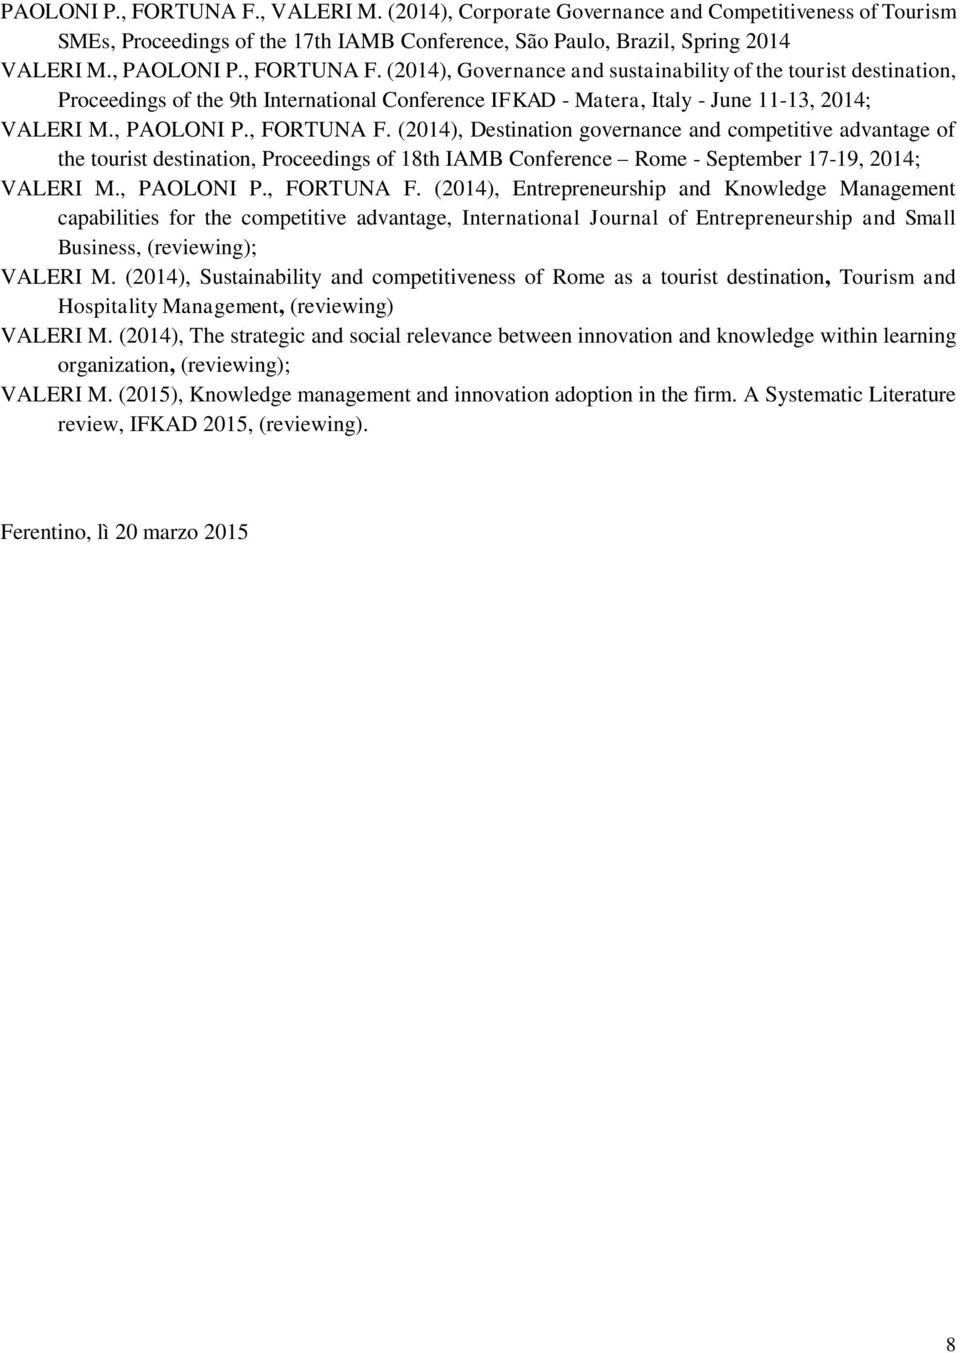 , FORTUNA F. (2014), Destination governance and competitive advantage of the tourist destination, Proceedings of 18th IAMB Conference Rome - September 17-19, 2014; VALERI M., PAOLONI P., FORTUNA F. (2014), Entrepreneurship and Knowledge Management capabilities for the competitive advantage, International Journal of Entrepreneurship and Small Business, (reviewing); VALERI M.